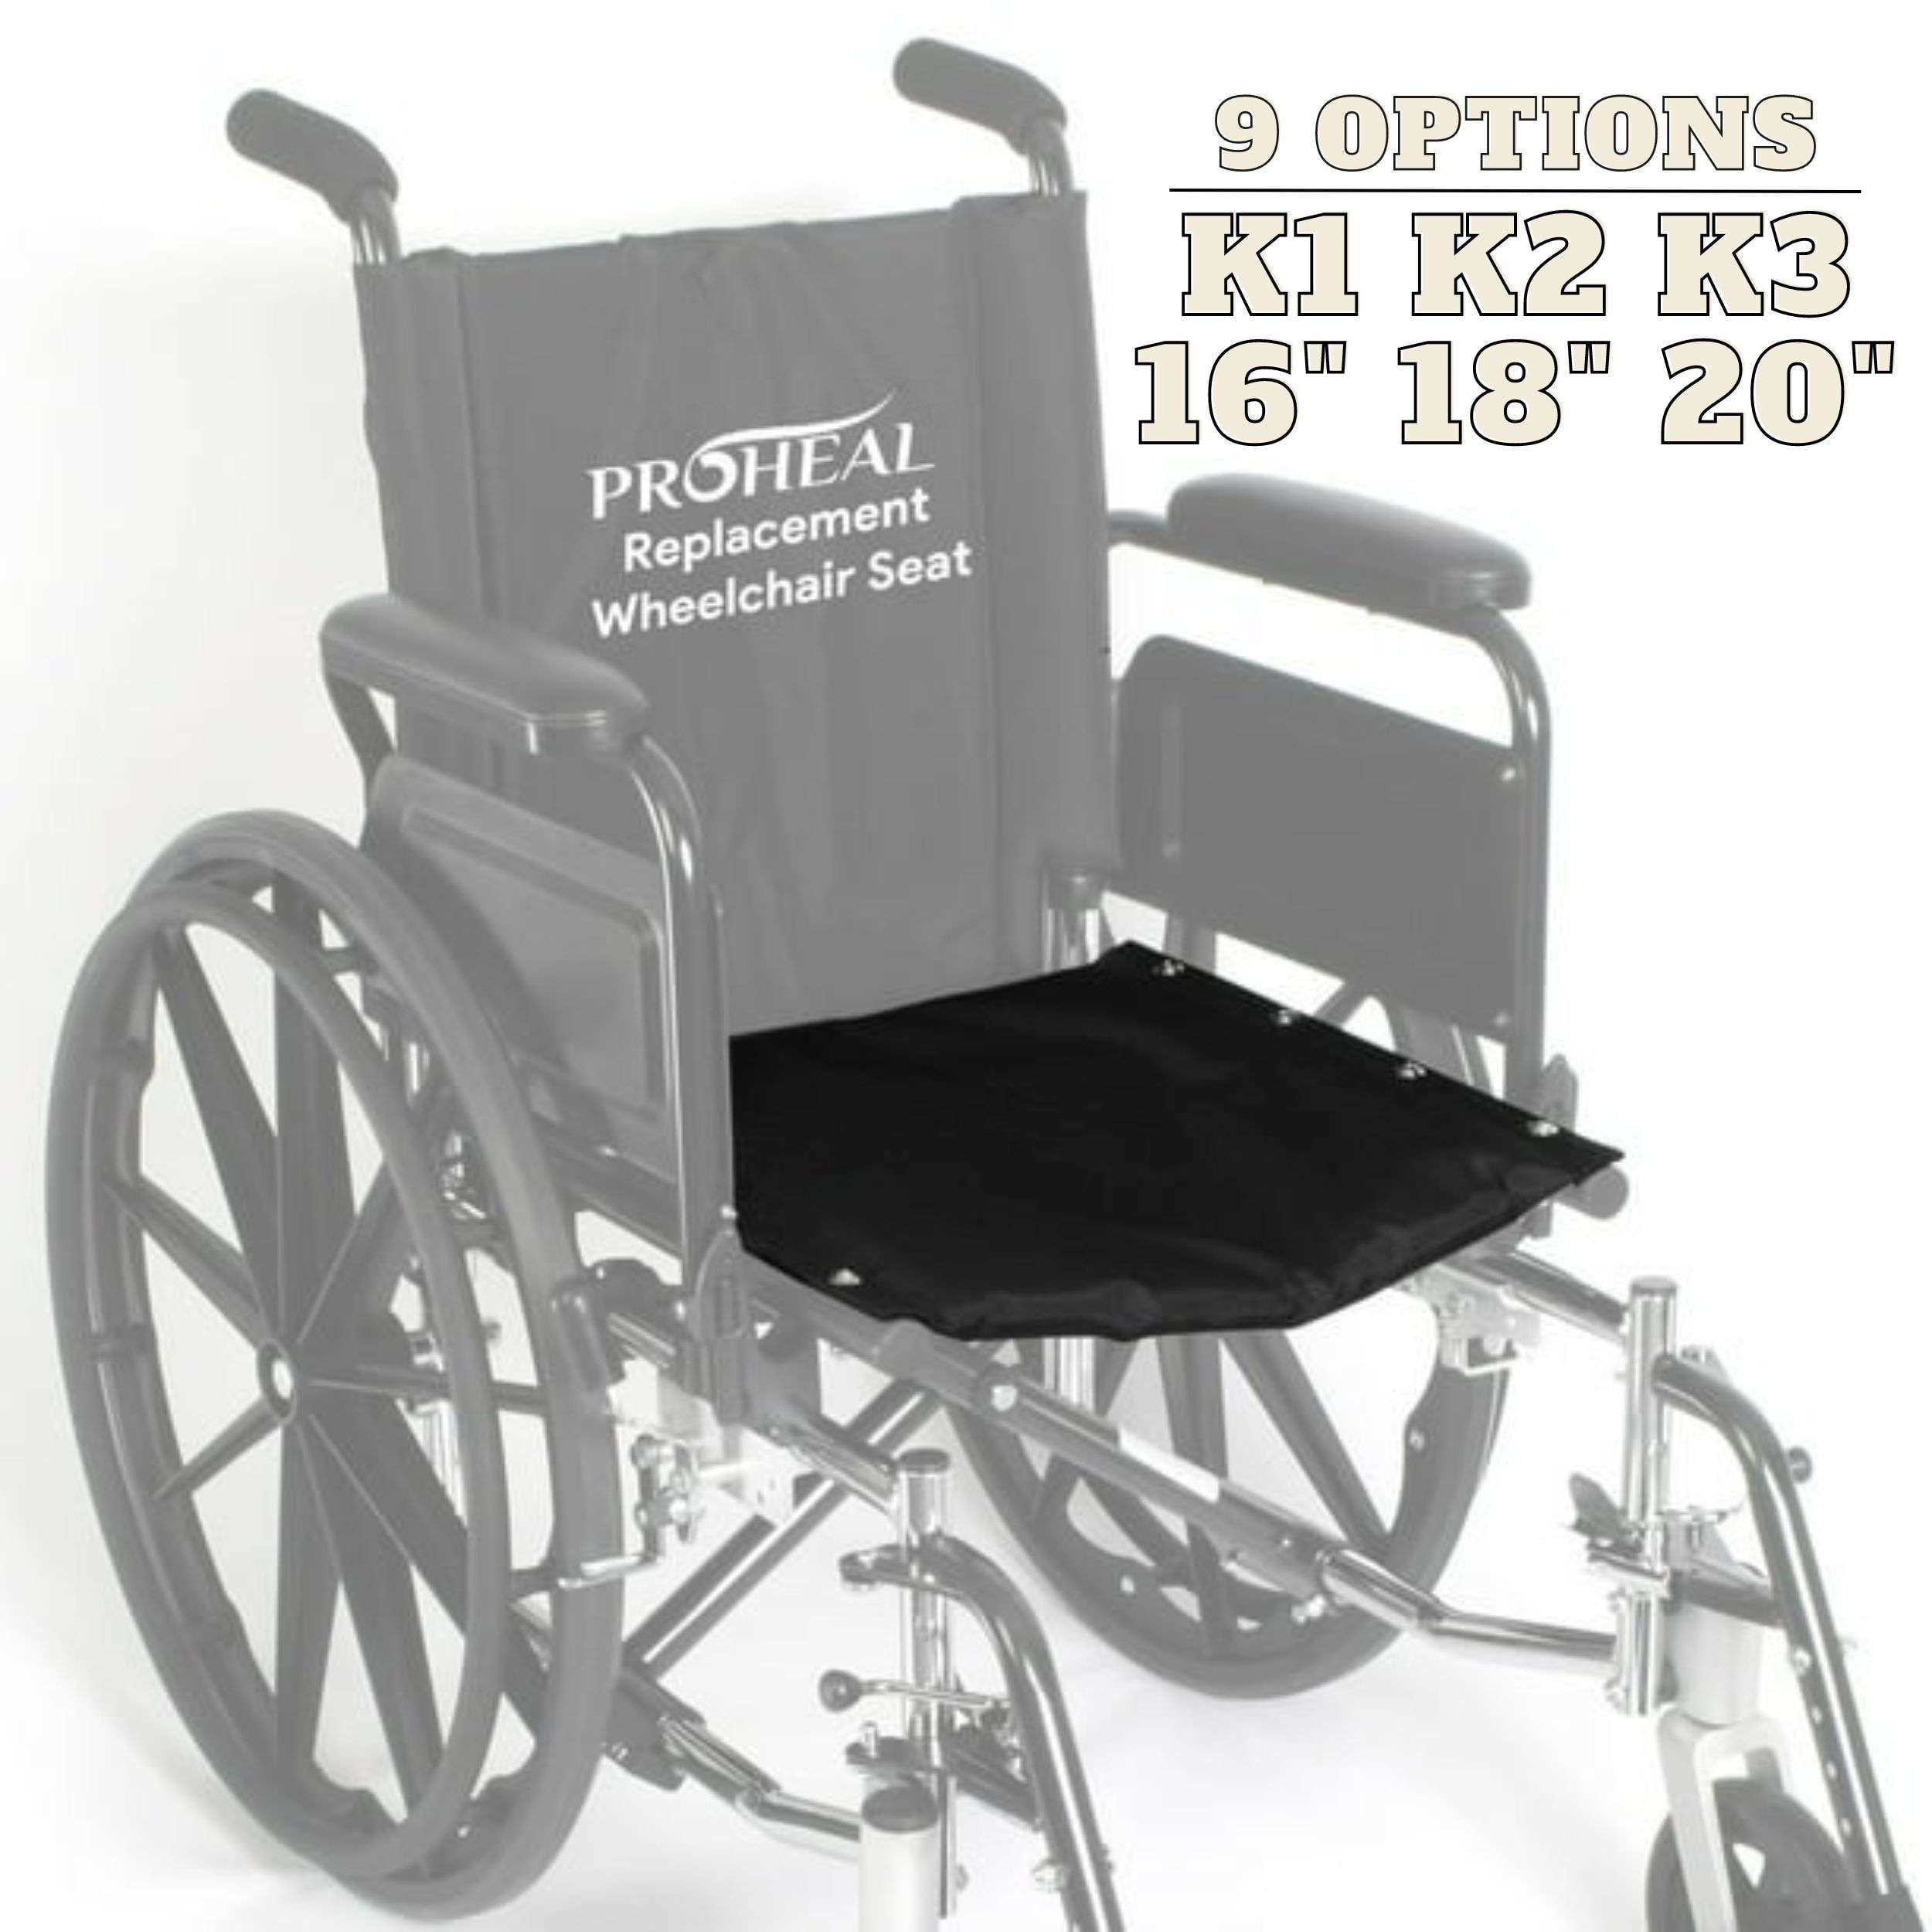 Pro Heal Wheelchair Seat Replacement - Supportive Padded Seat - K2